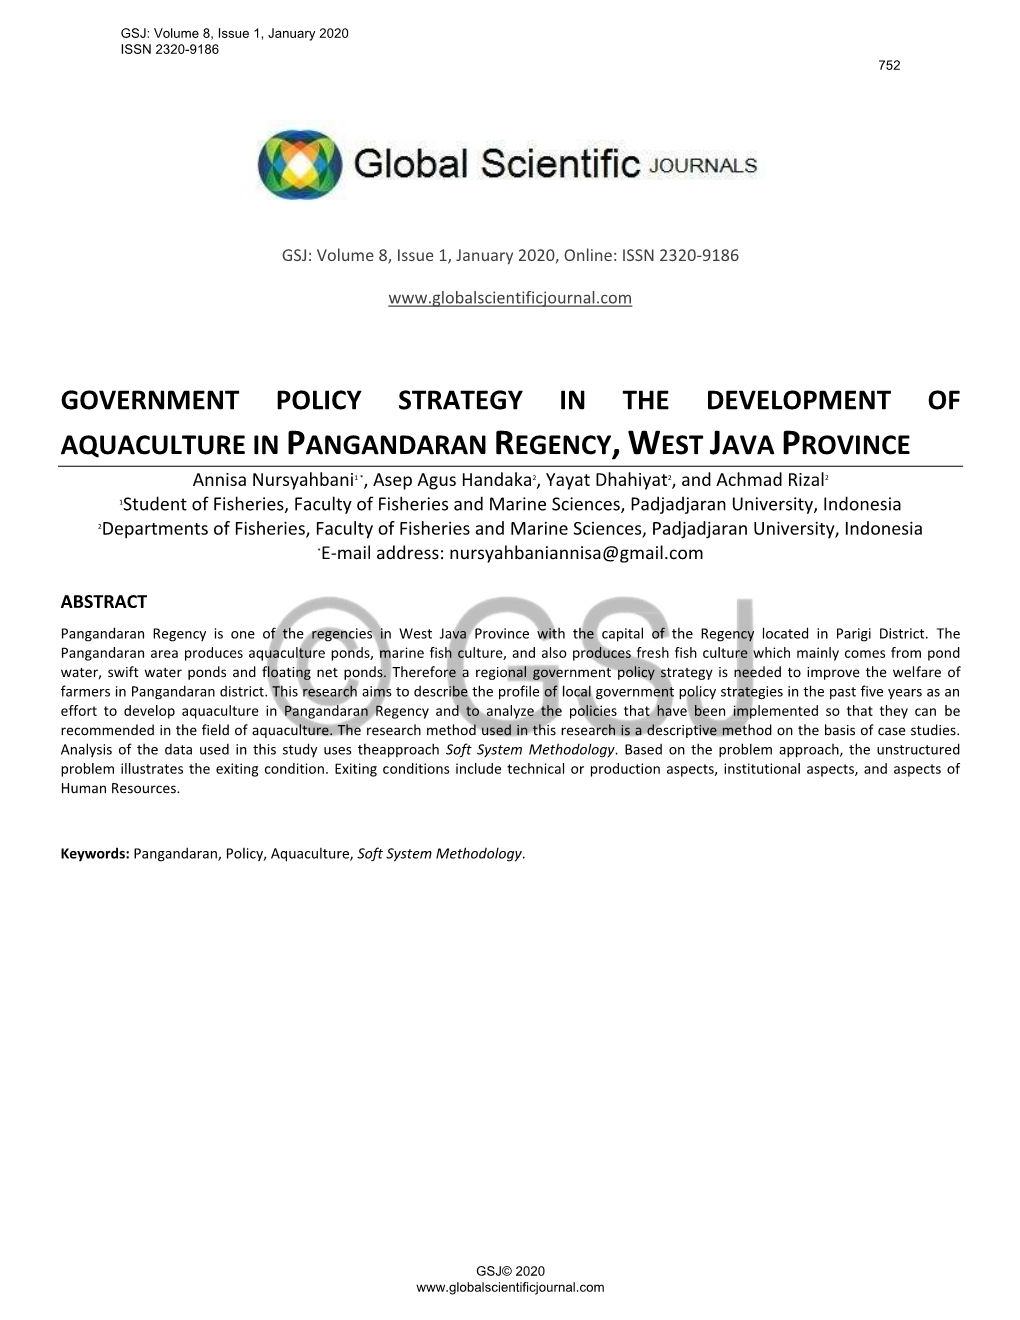 Government Policy Strategy in the Development of Aquaculture In